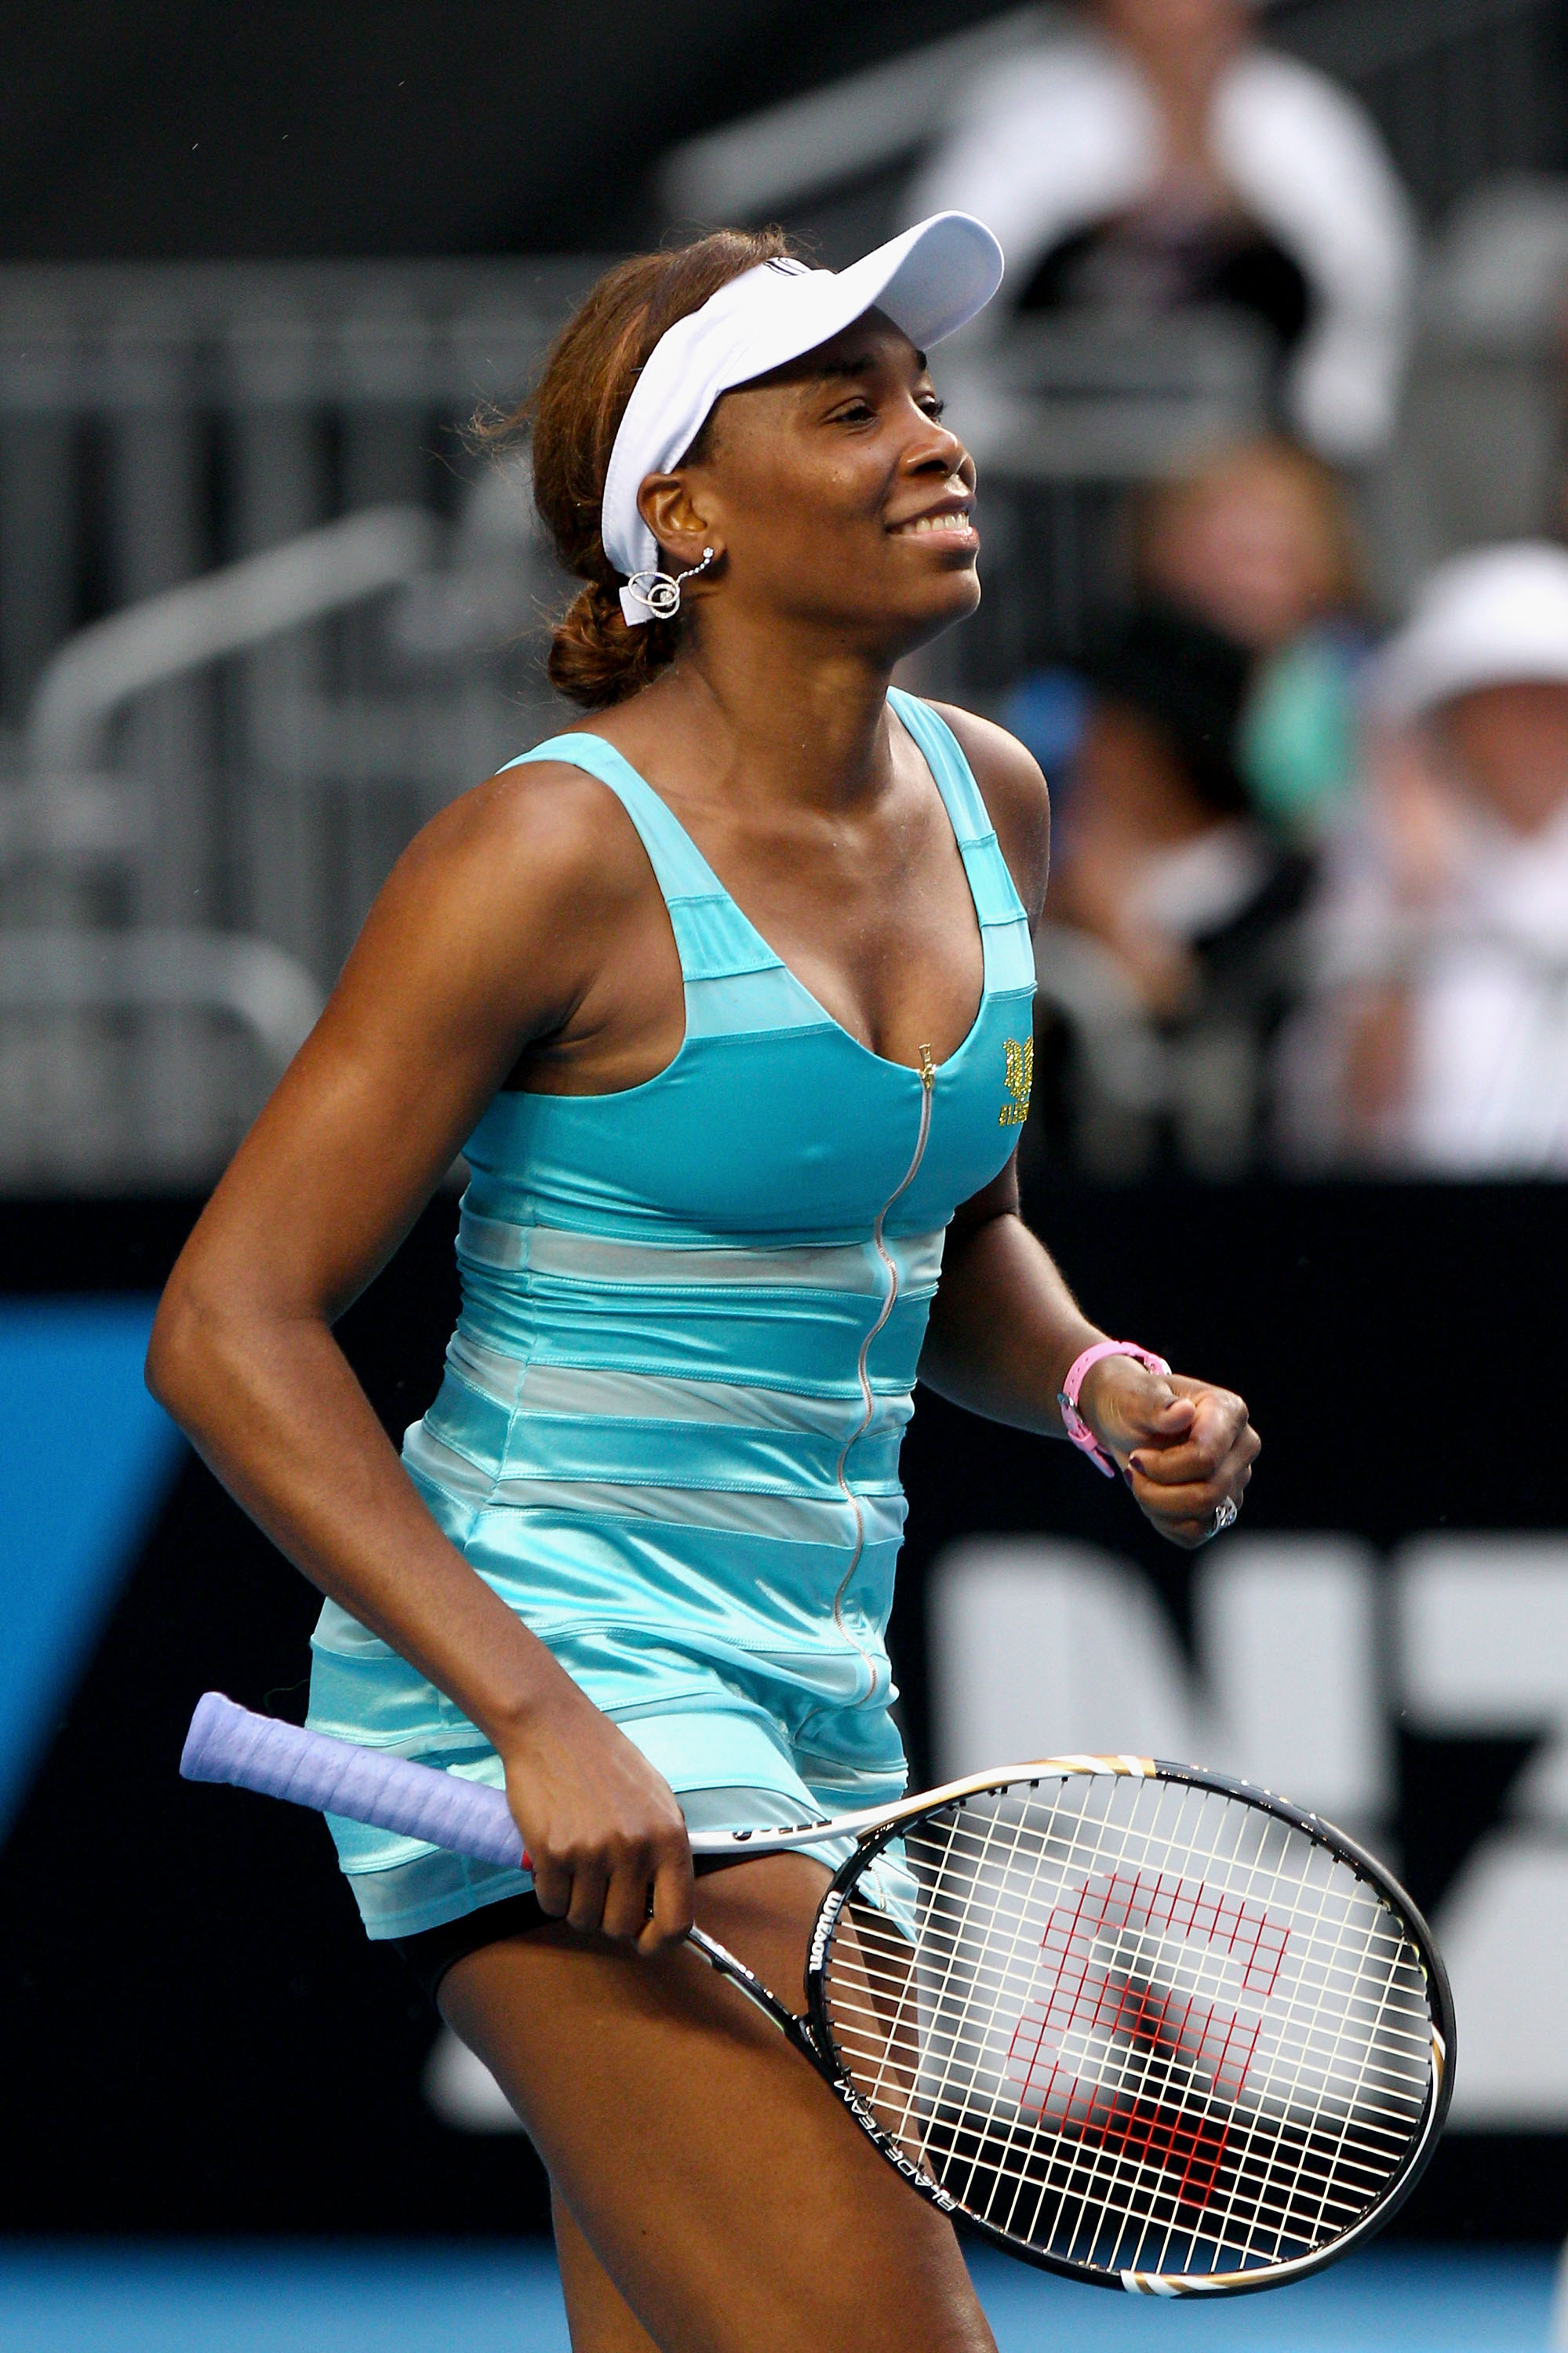 Australian Open 2011: Venus Williams and 10 Other Americans With a Shot | Bleacher ...